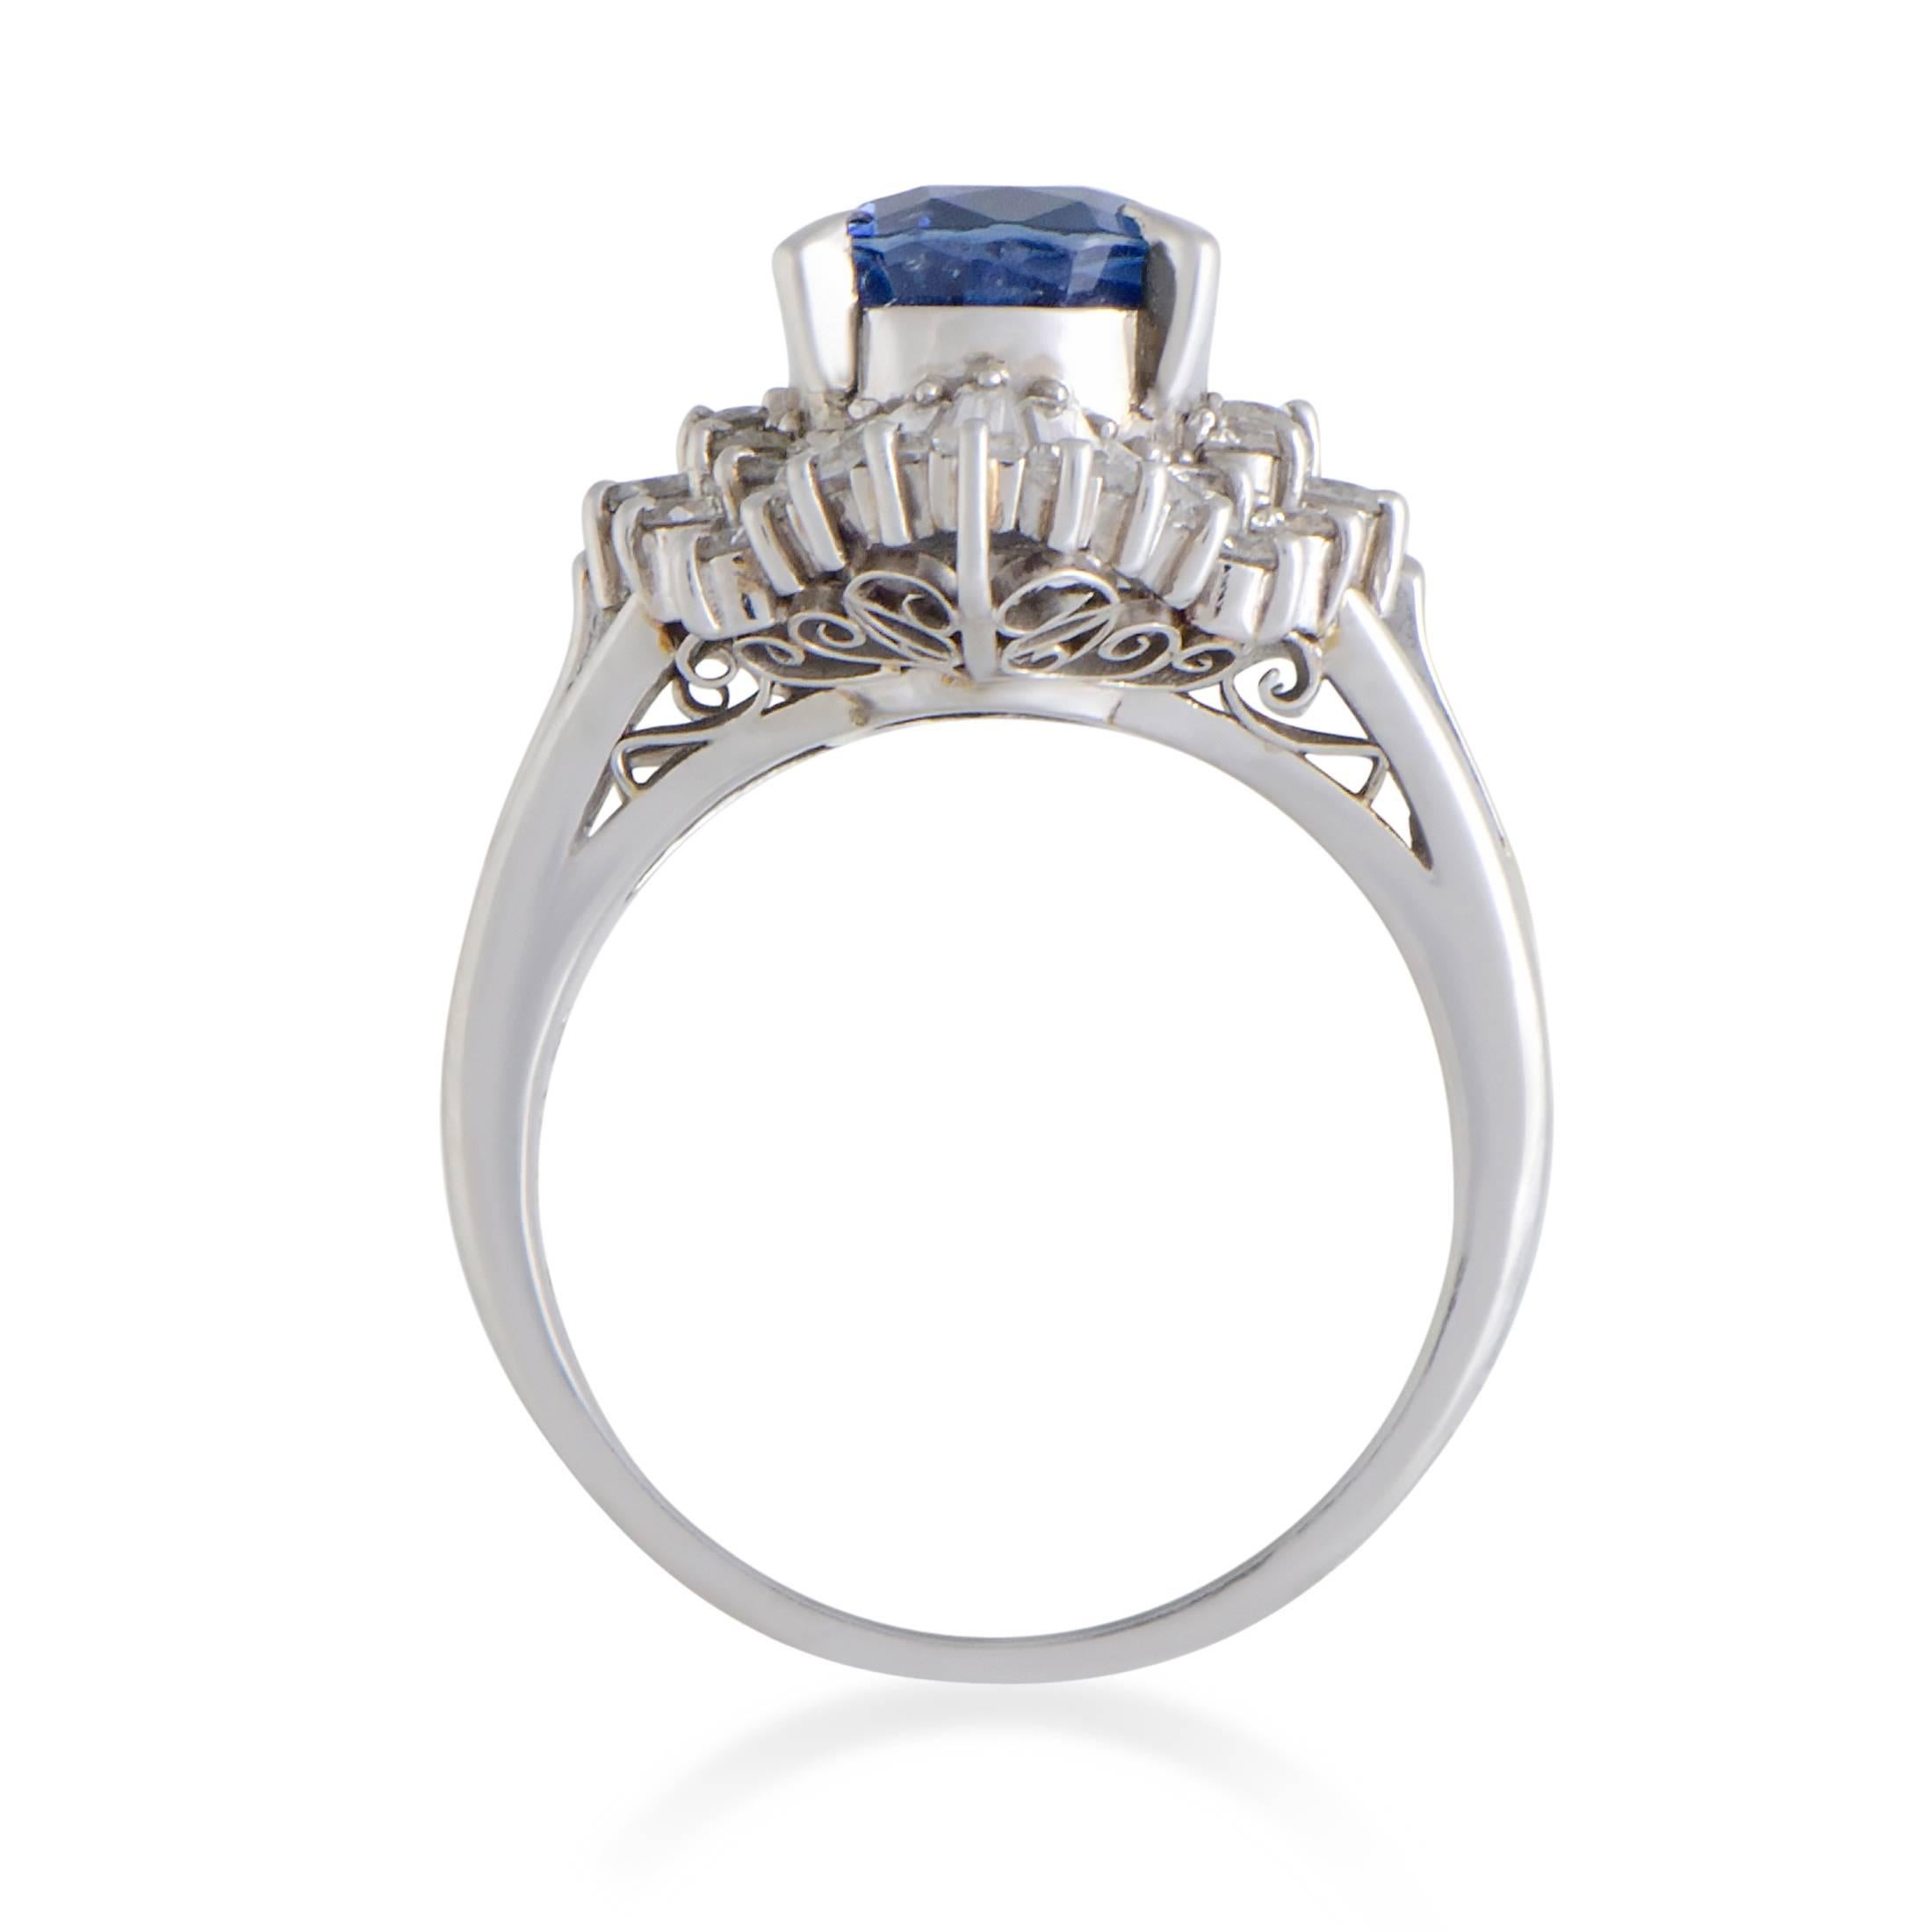 This ring offers a splendidly prestigious appearance thanks to its timelessly elegant design and tasteful blend of luxurious gemstones. The ring is made of platinum and boasts an eye-catching sapphire as the center stone, accompanied by a plethora